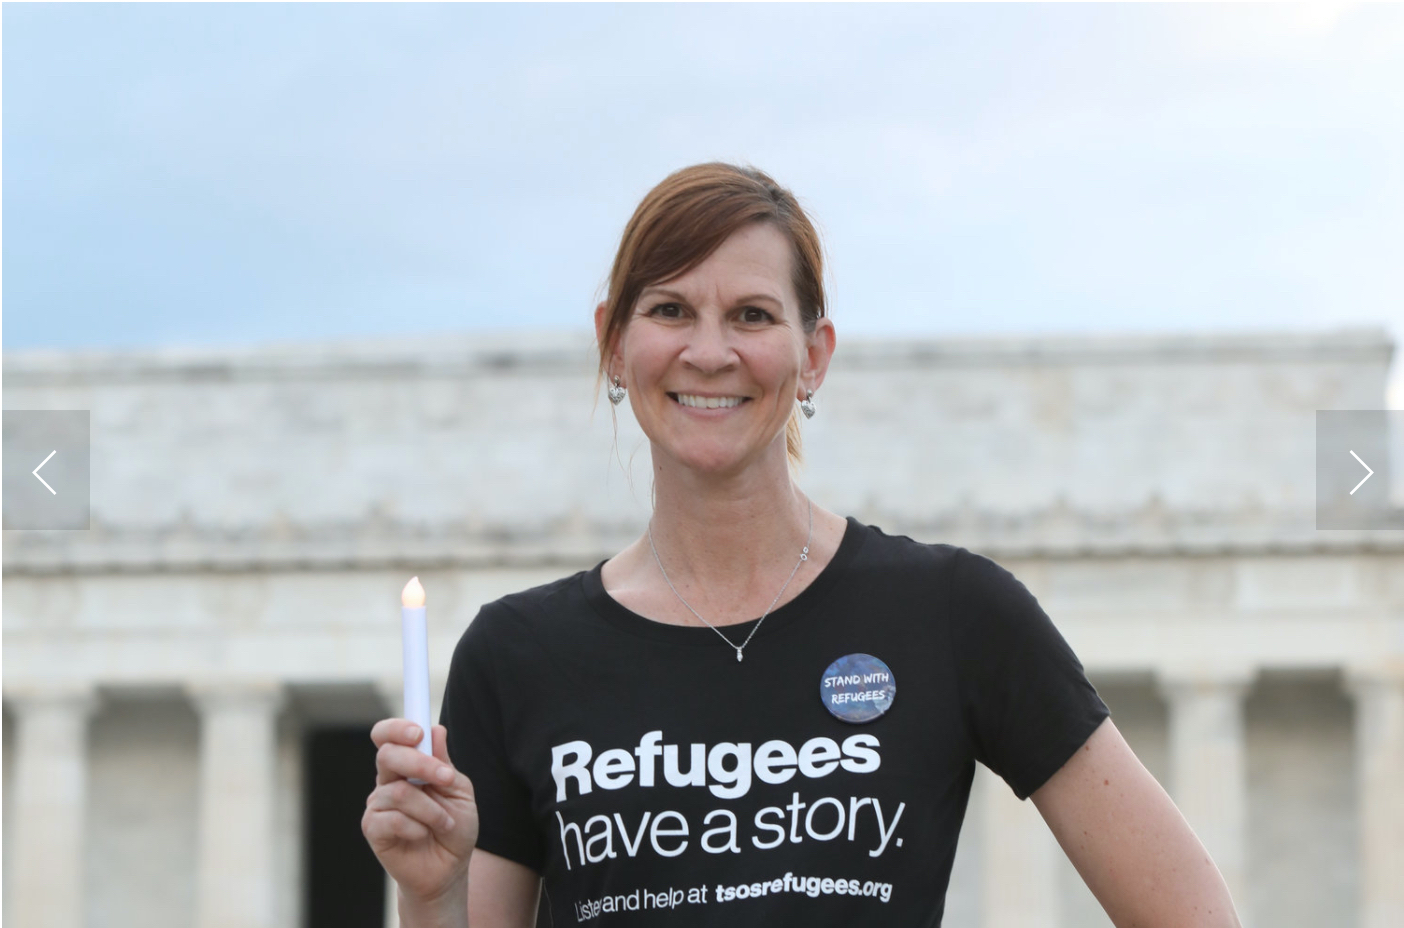 Brandi Kilmer is dressed in a black "Refugees have a story" Tshirt.